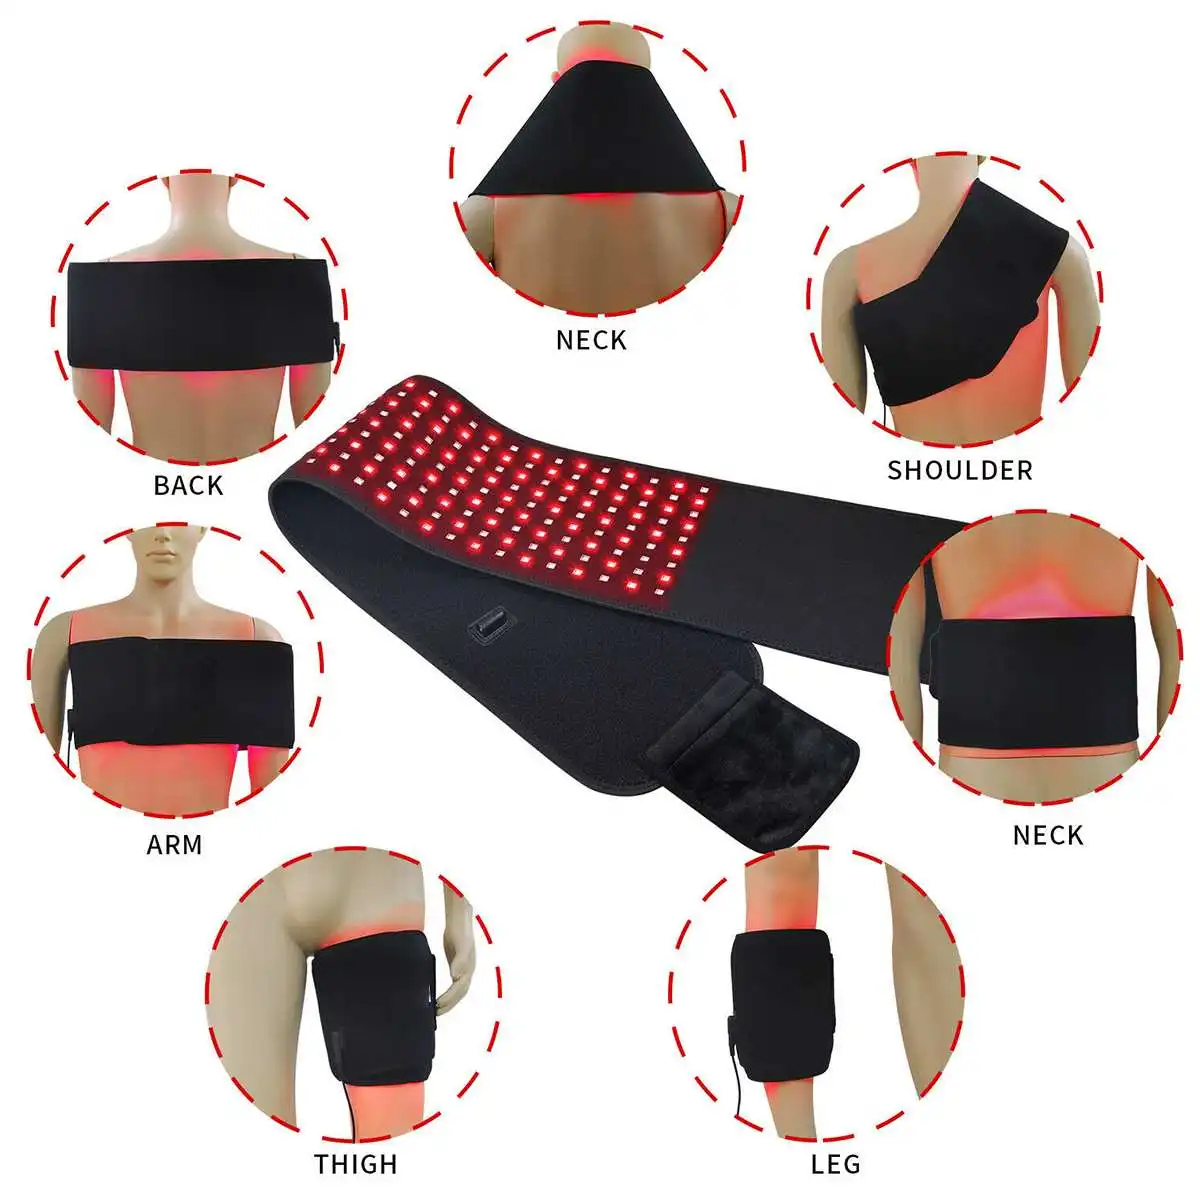 Red & Infrared LED Light Therapy Belt 850nm 660nm Back Pain Relief Belt Weight Loss Slimming Machine Waist Heat Pad Massager